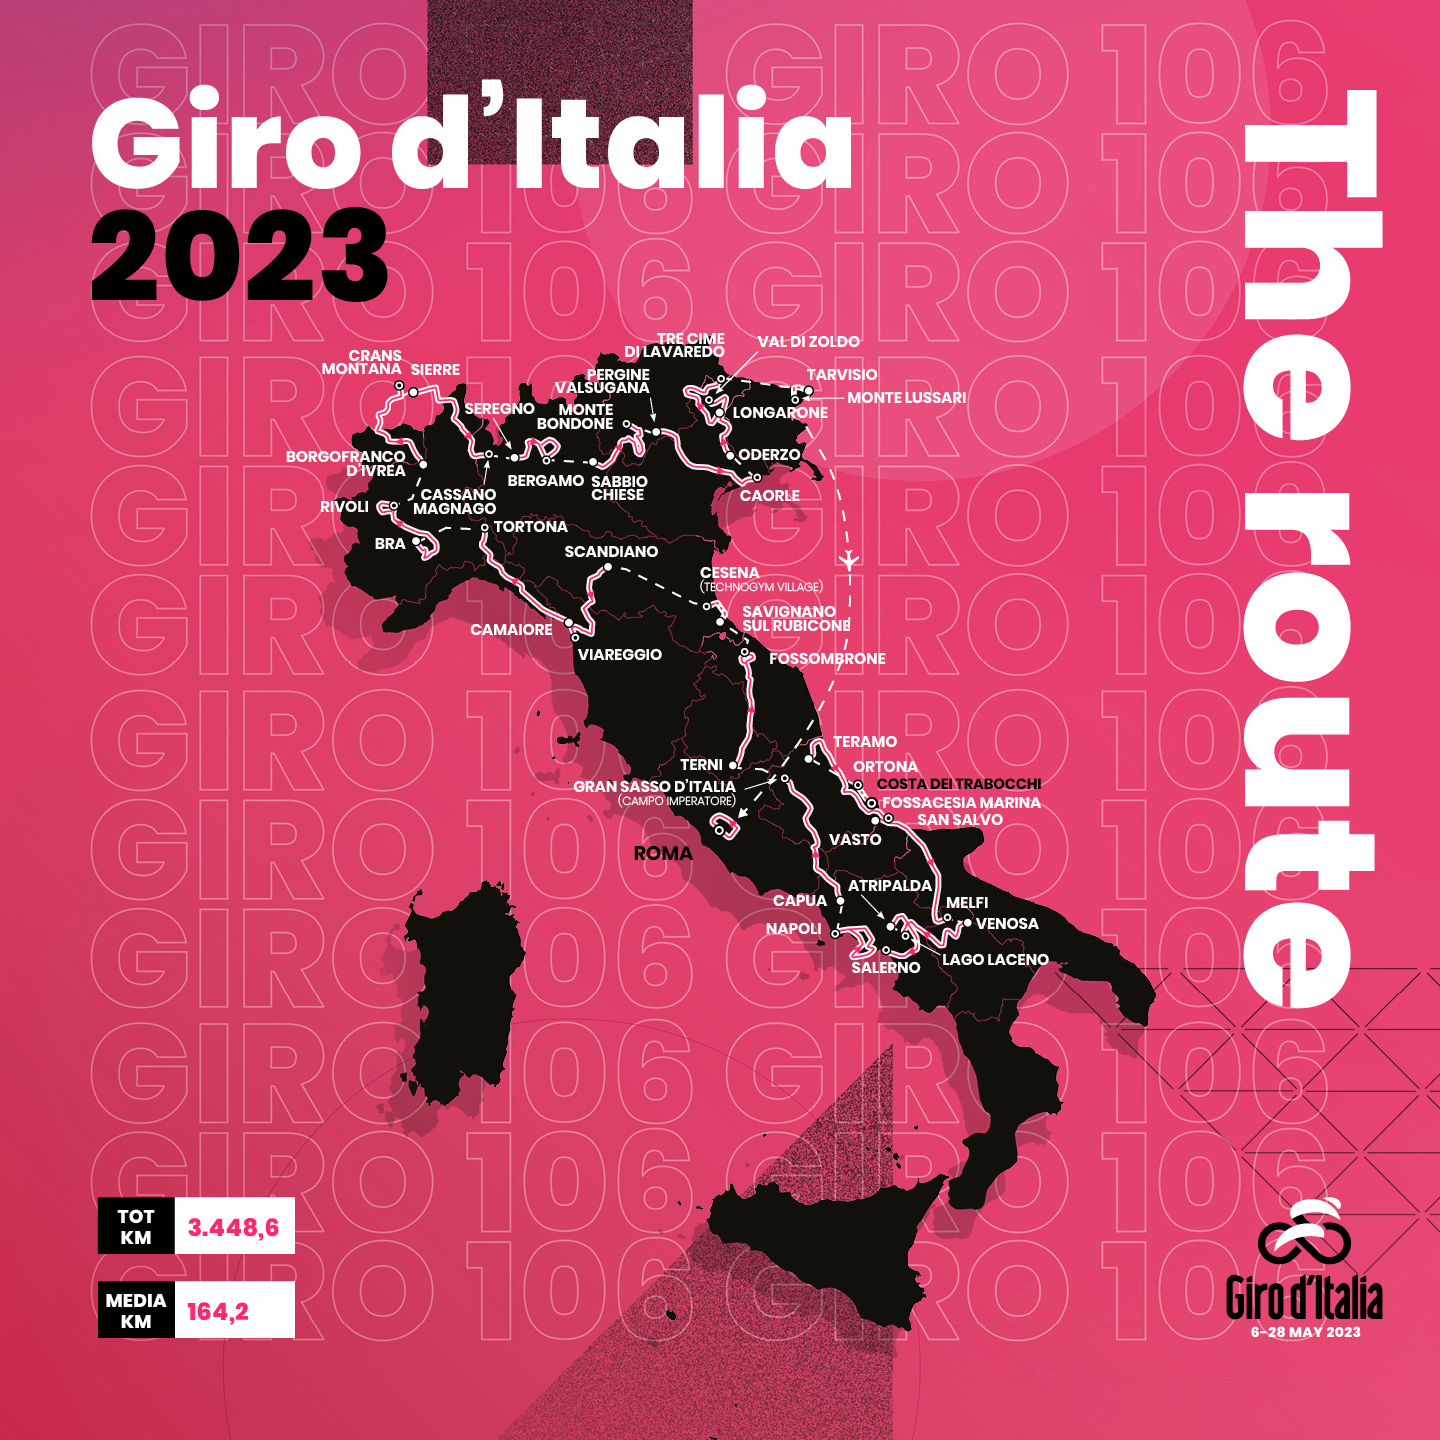 Giro d'Italia 2023 starting from the and ending with the Roman